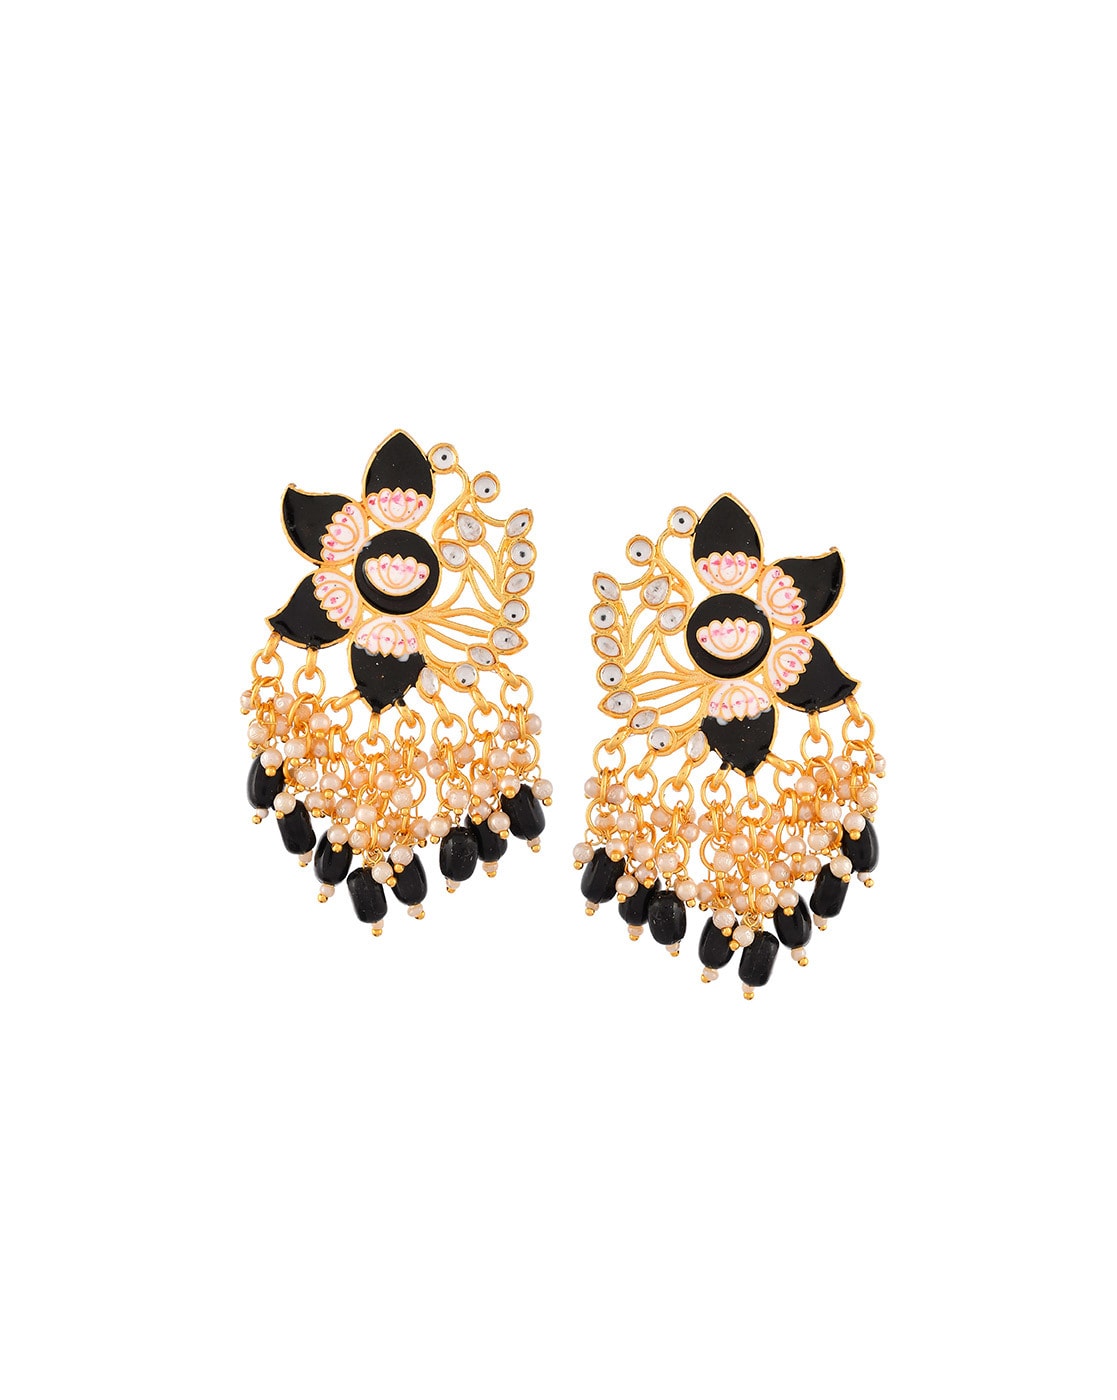 gold black beads earrings designs with weight and price new models earrings  designs - YouTube